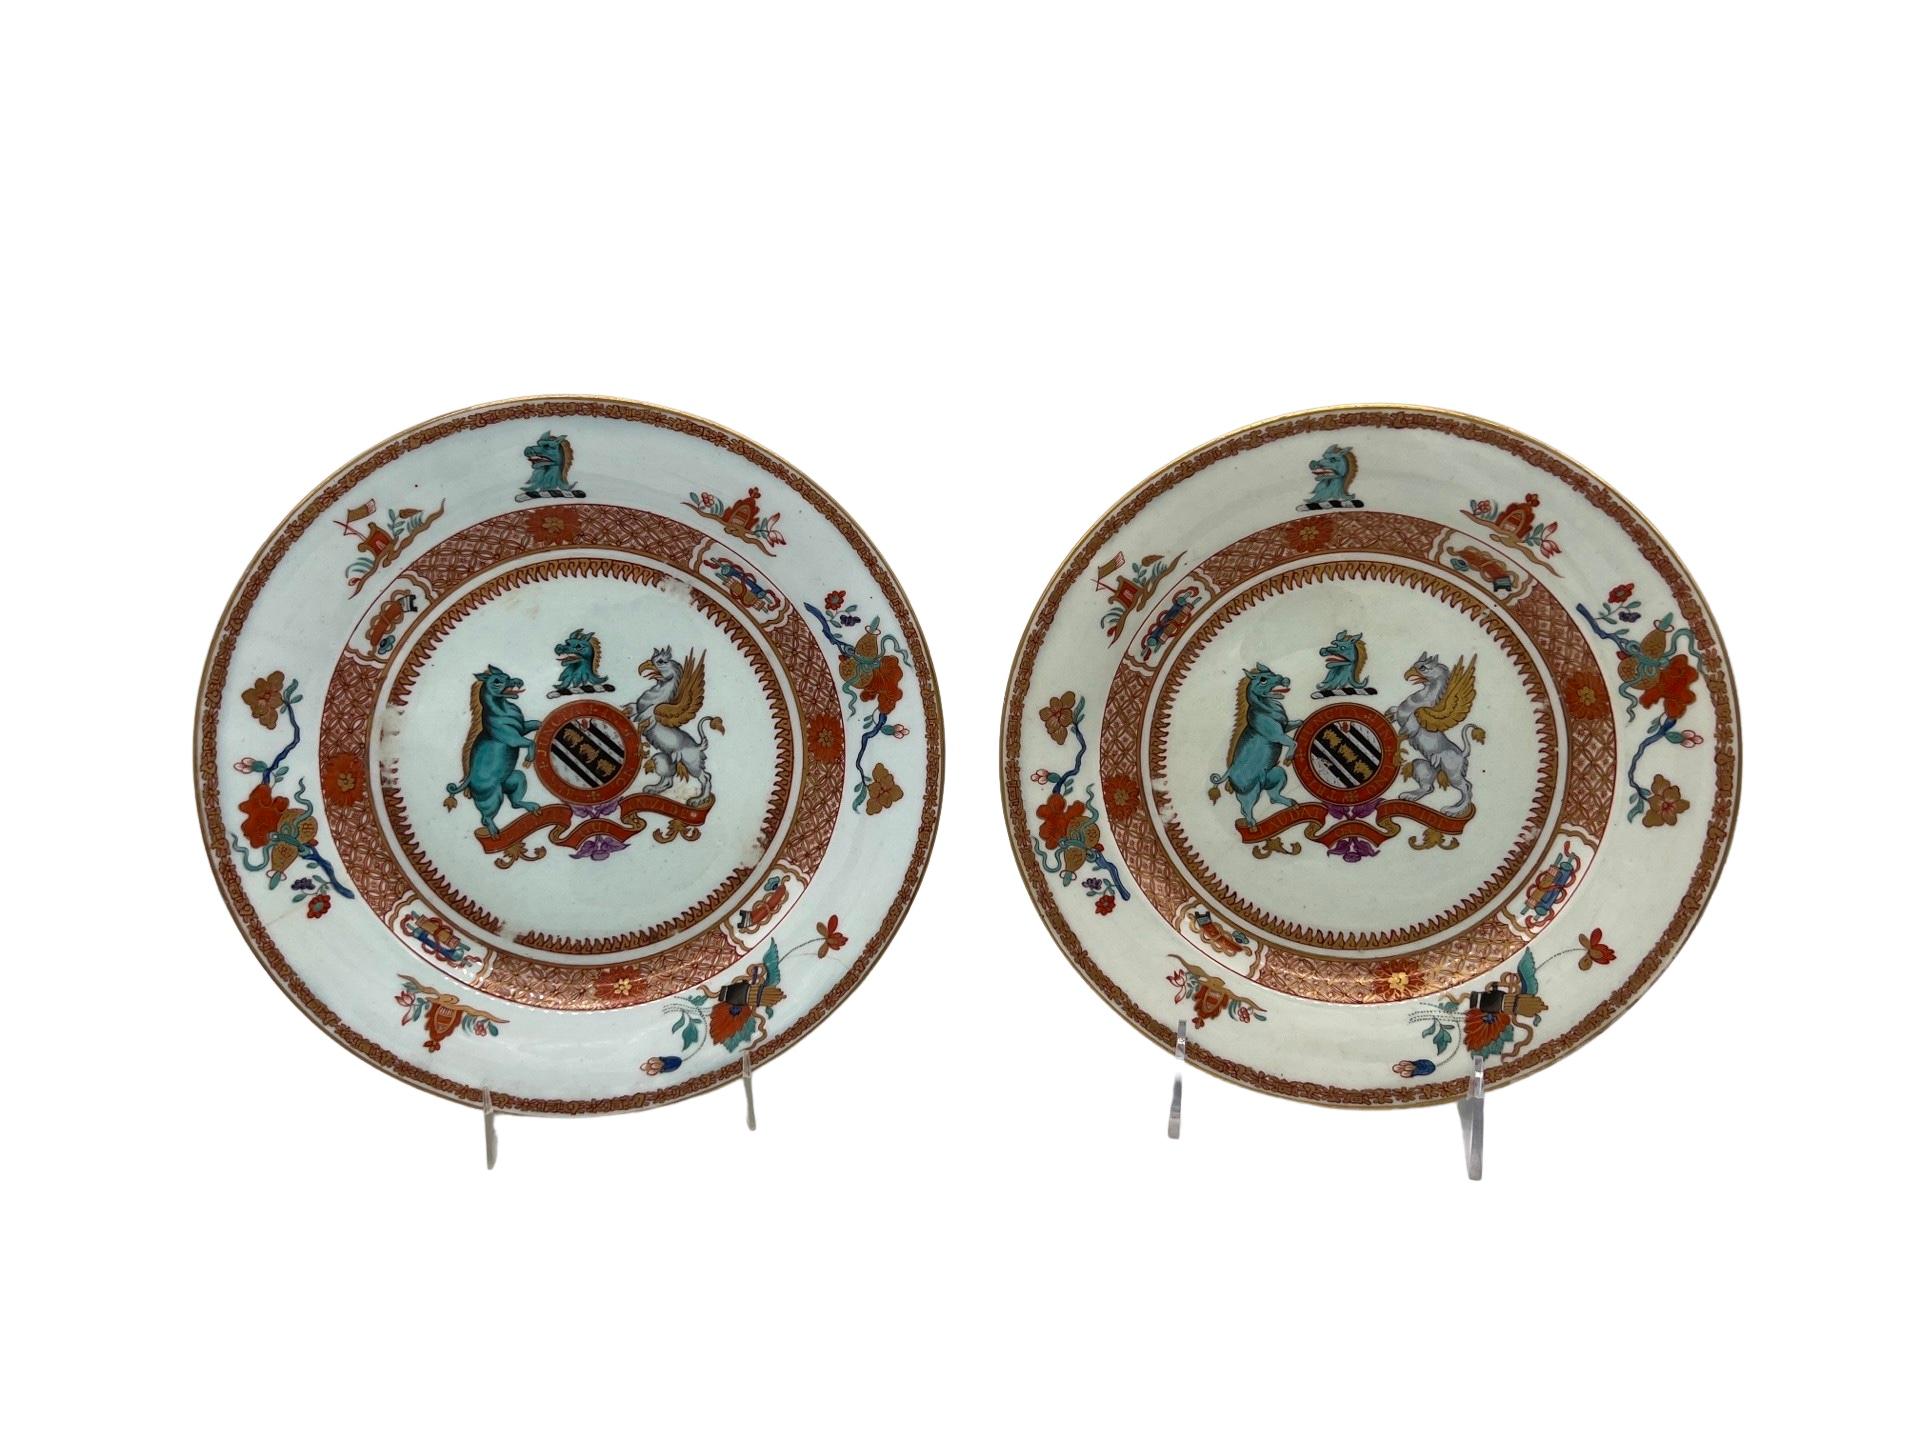 Pair of Export Porcelain Armorial Soup Plates
China, c. 1731
Centering the arms of Yonge, enclosed by the motto of the order of the Bath, flanked by a boar and griffon, surmounted by a boar's head and sitting atop the family motto, the arms